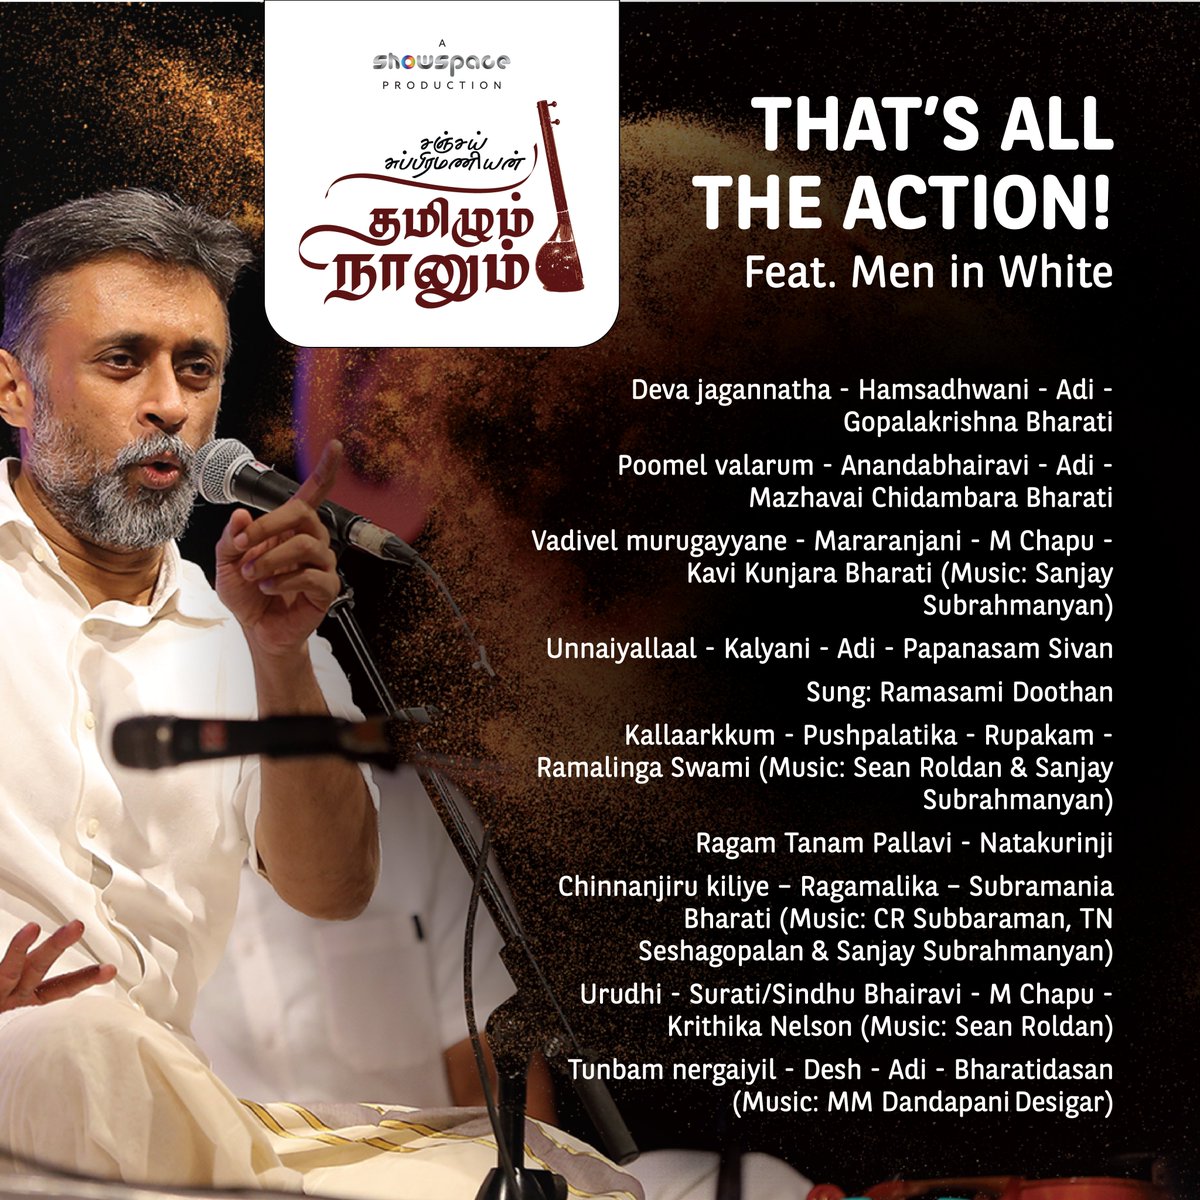 The worldwide streaming of the timeless classic Thamizhum Naanum. On Jan 14, 2024. Prebook your show now. Prebook your show now. thamizhumnaanum.com . . @sanjaysub . . #sanjaysubrahmanyan #chennai #event #livemusic #carnatic #carnatic_vocal